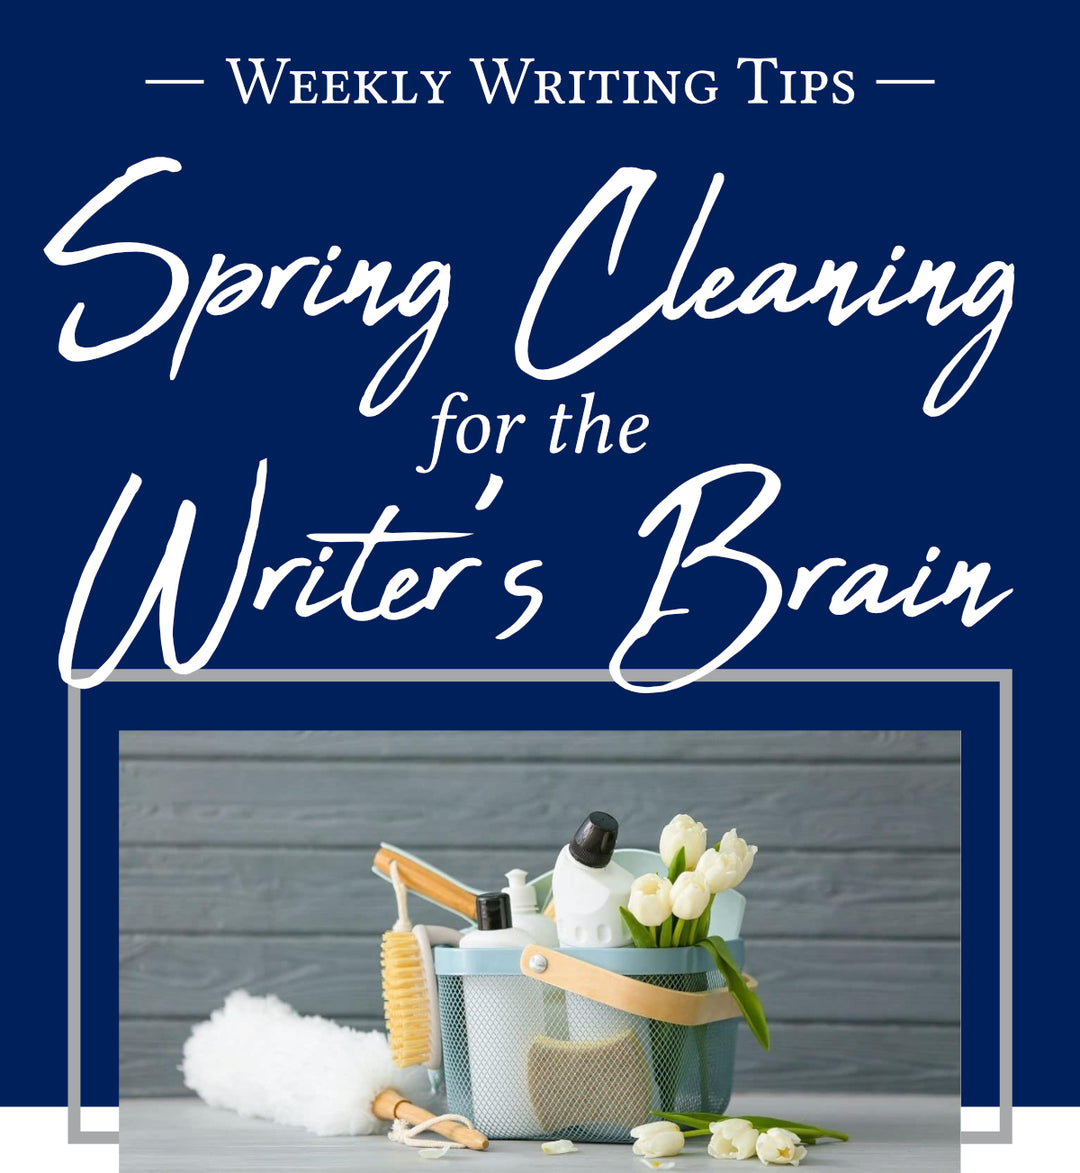 Spring Cleaning for the Writer's Brain